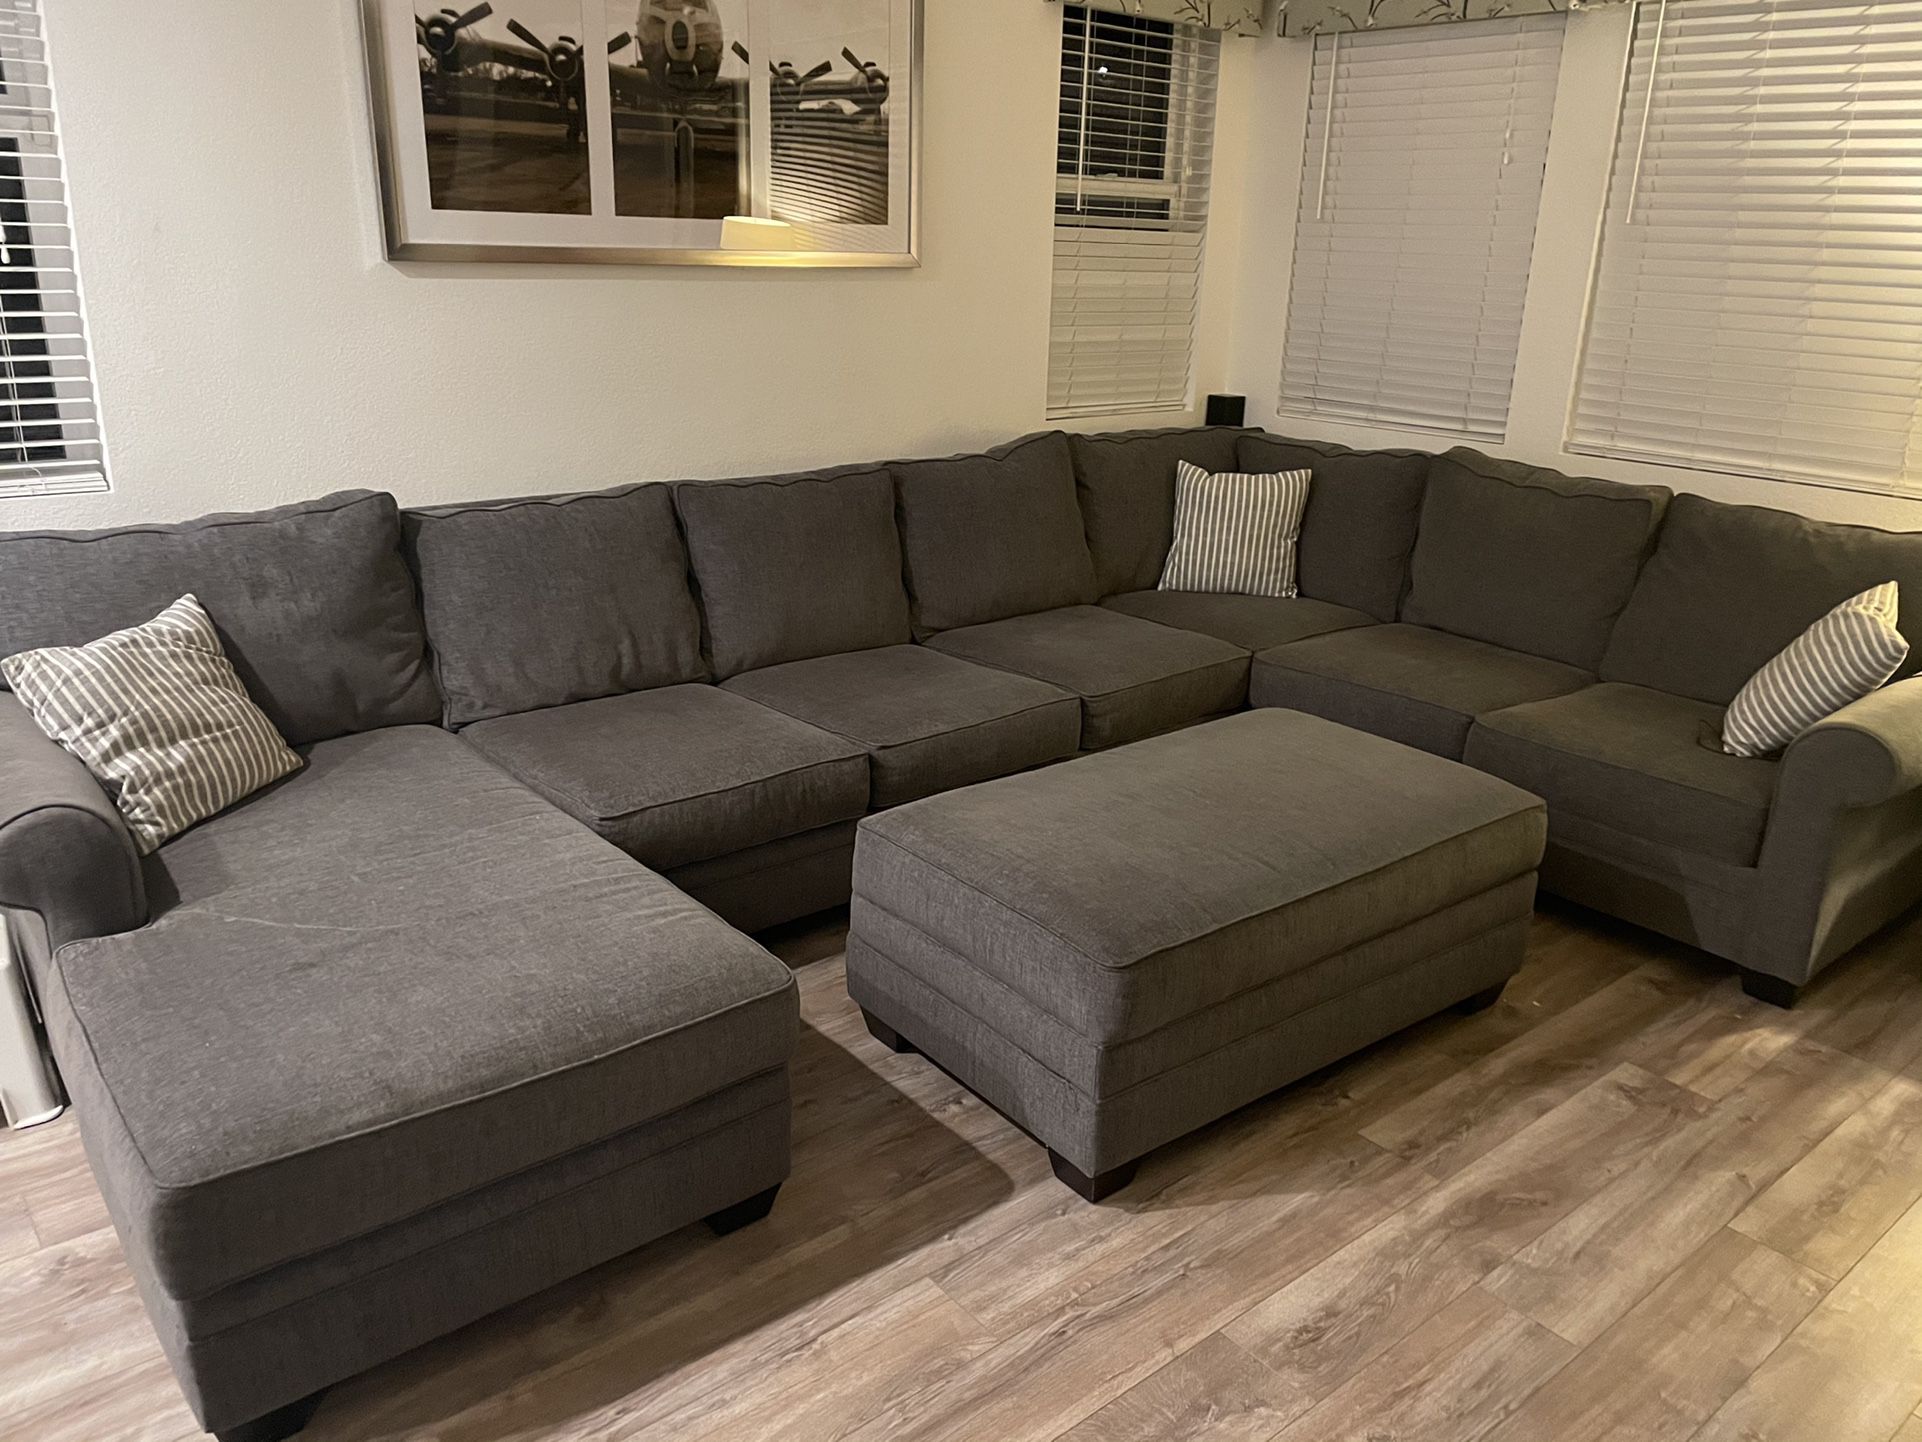 Oversize Couch & Ottoman